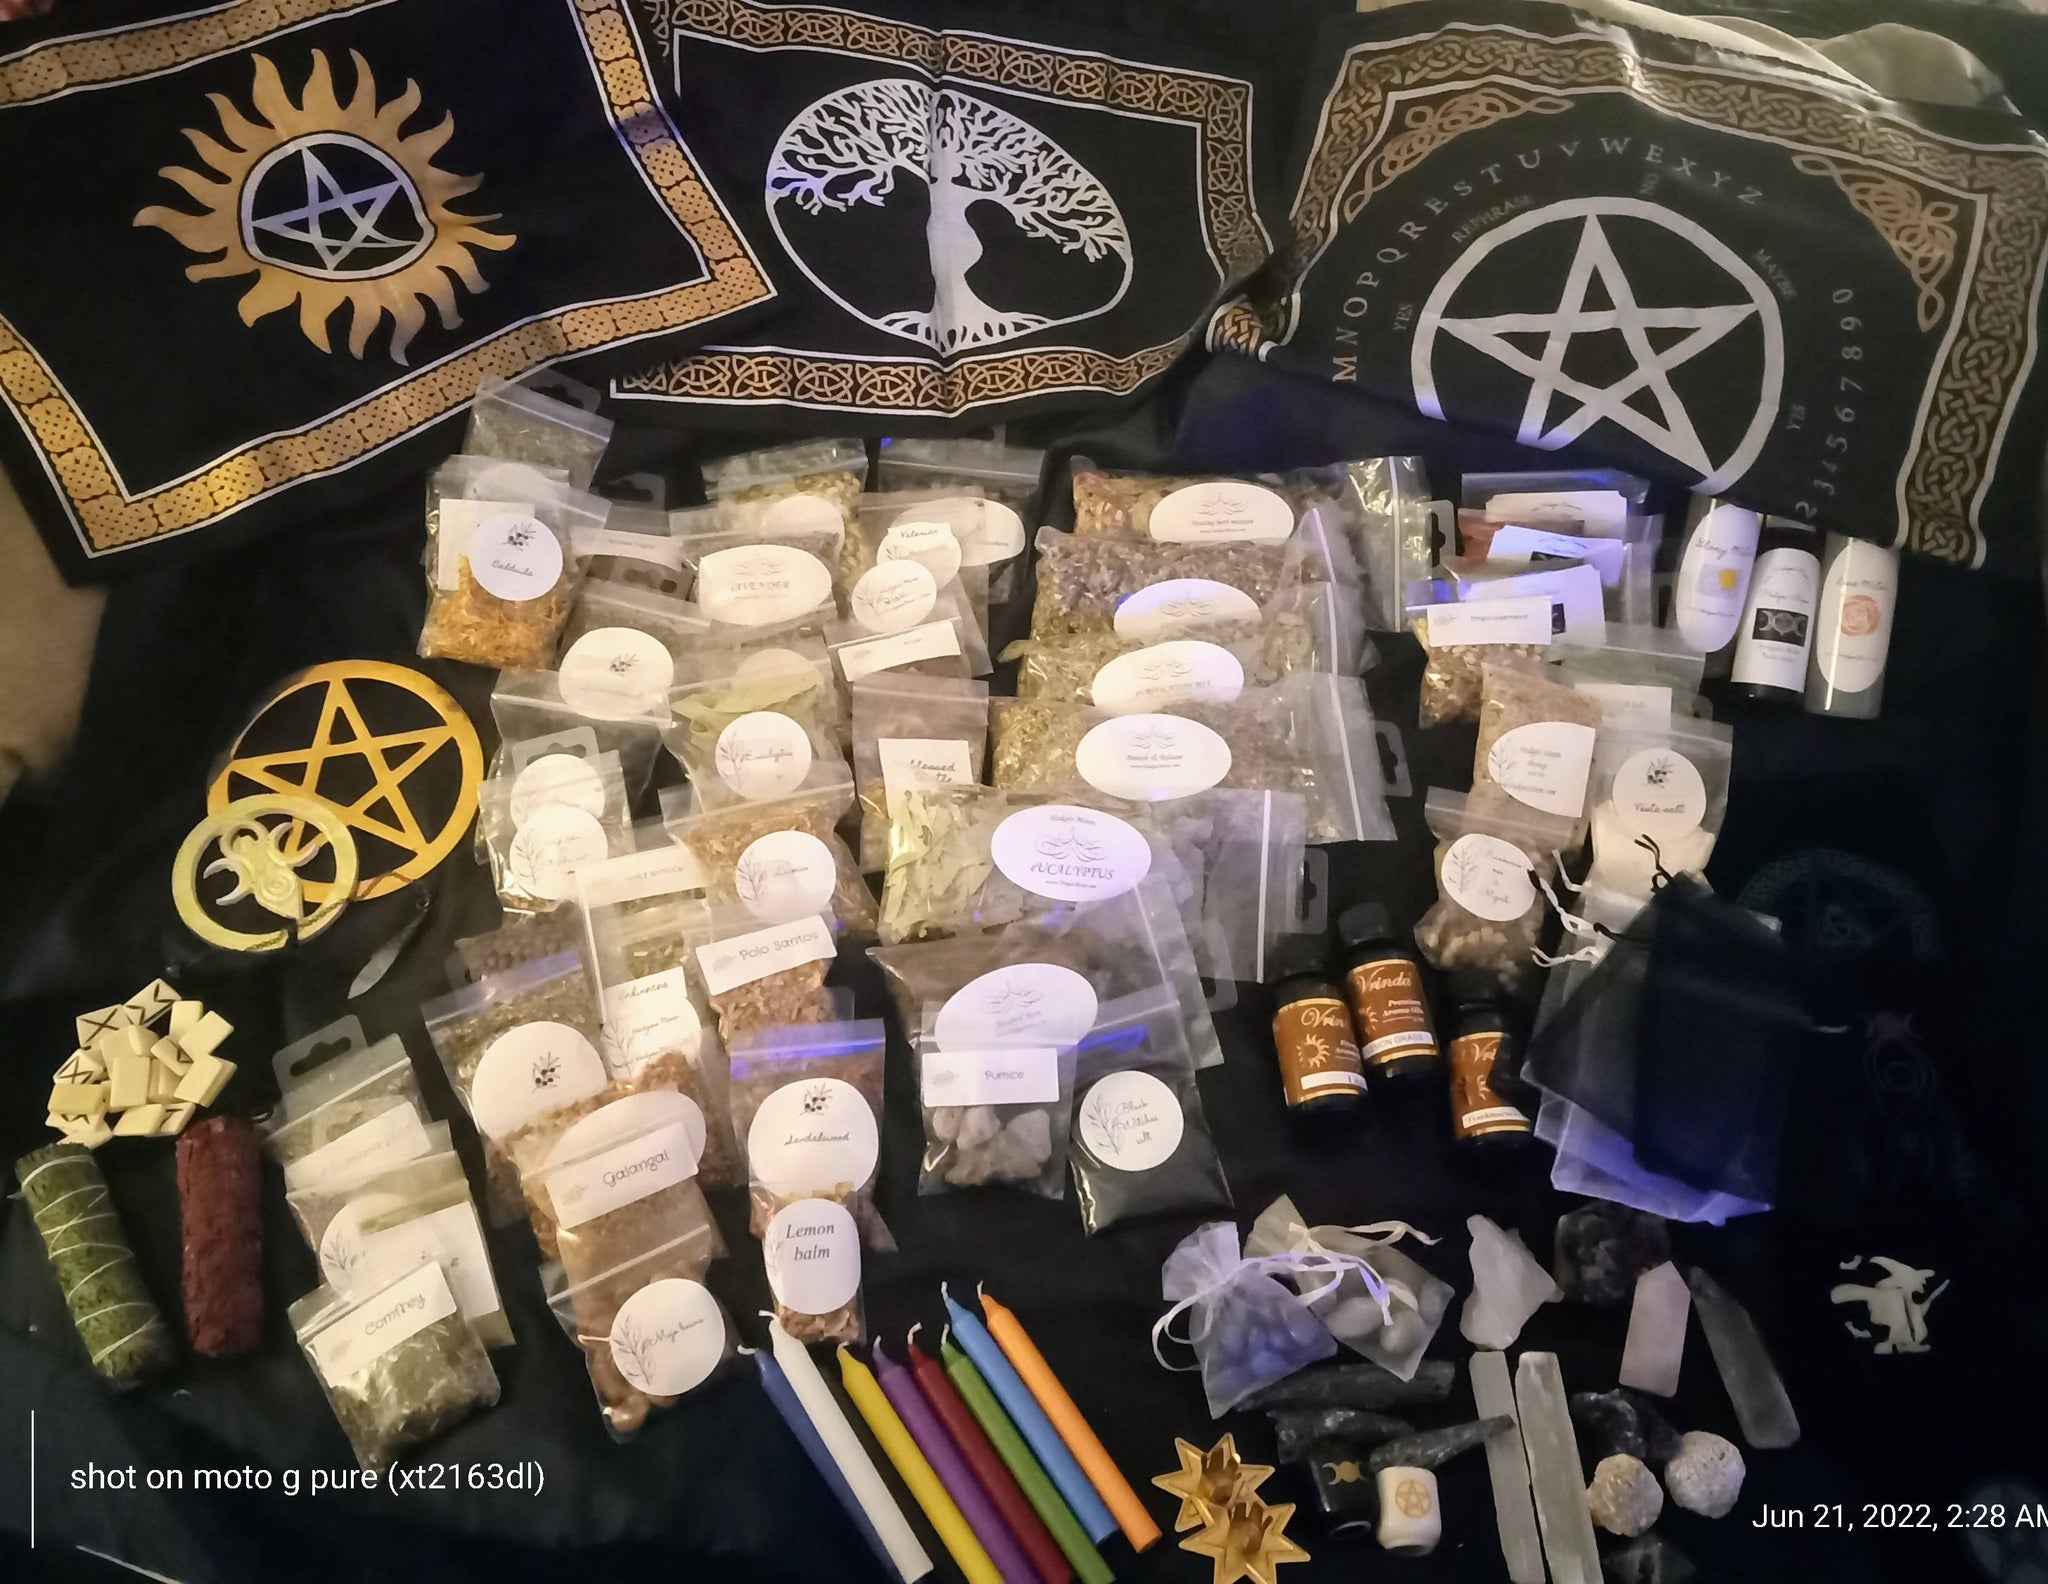 The Motherload Alter supplies